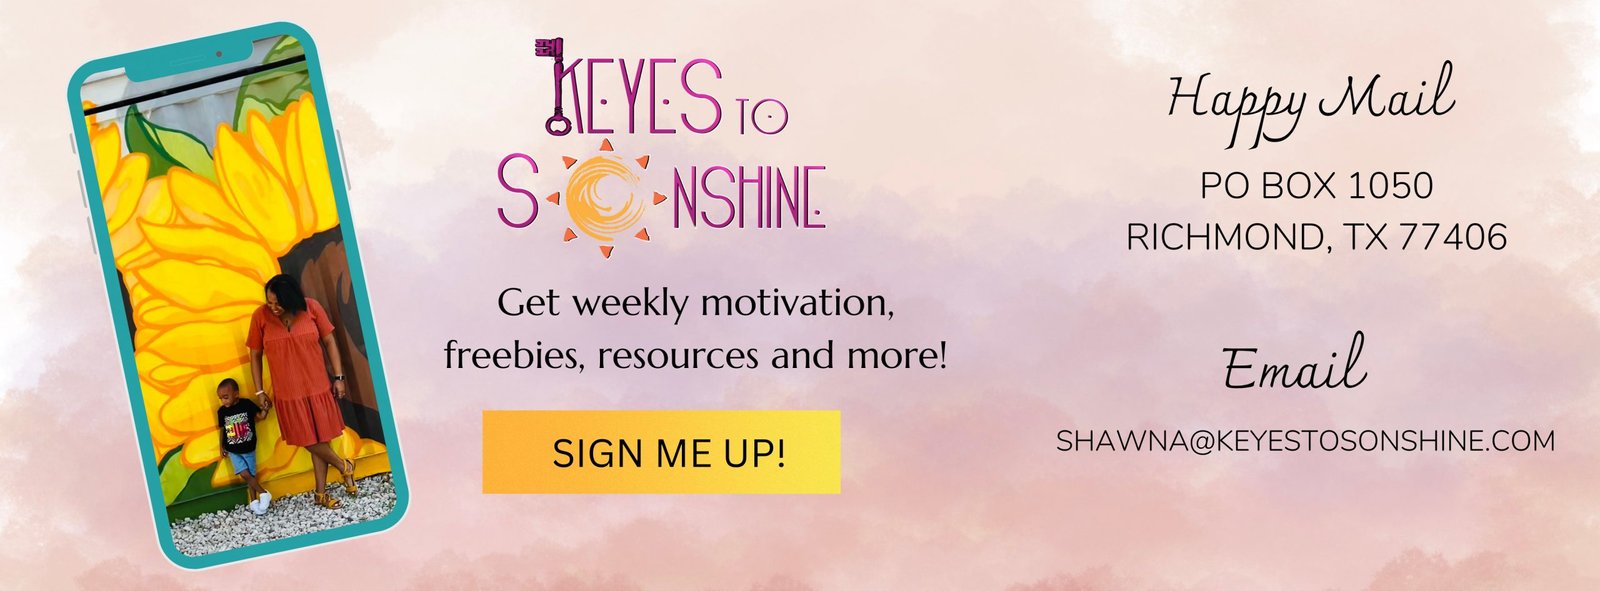 Keyes to Sunshine Logo button that reads - Get weekly motivation, freebies, resources and more! SIGN ME UP! Happy Mail PO BOX 1050 RICHMOND. TX 77406 Email, SHAWNA@KEYESTOSONSHINE.COM